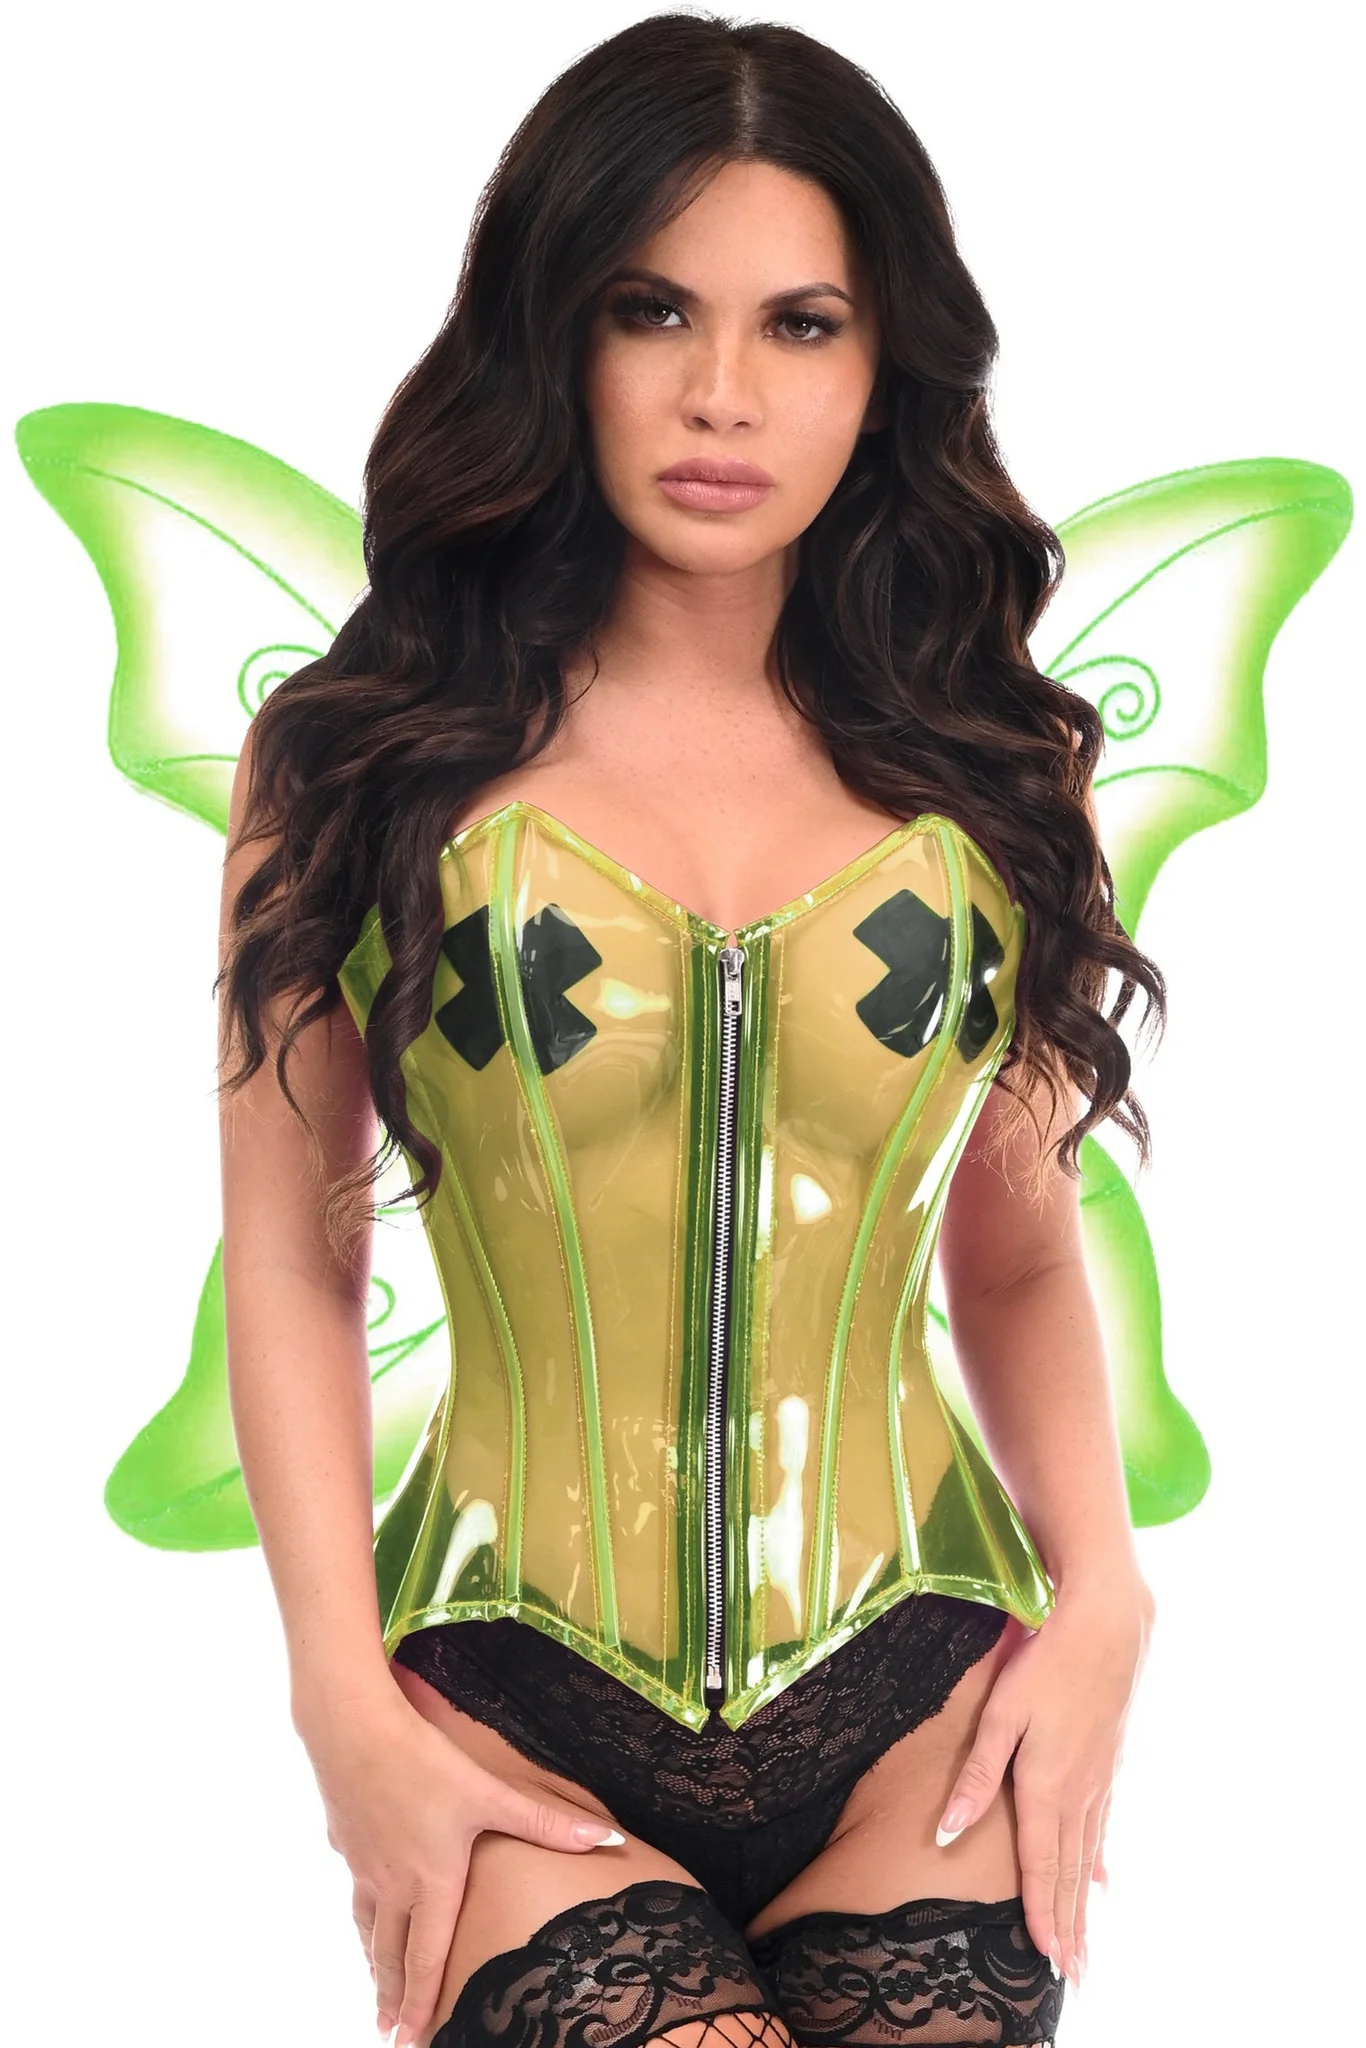 Pixie Clear Costume